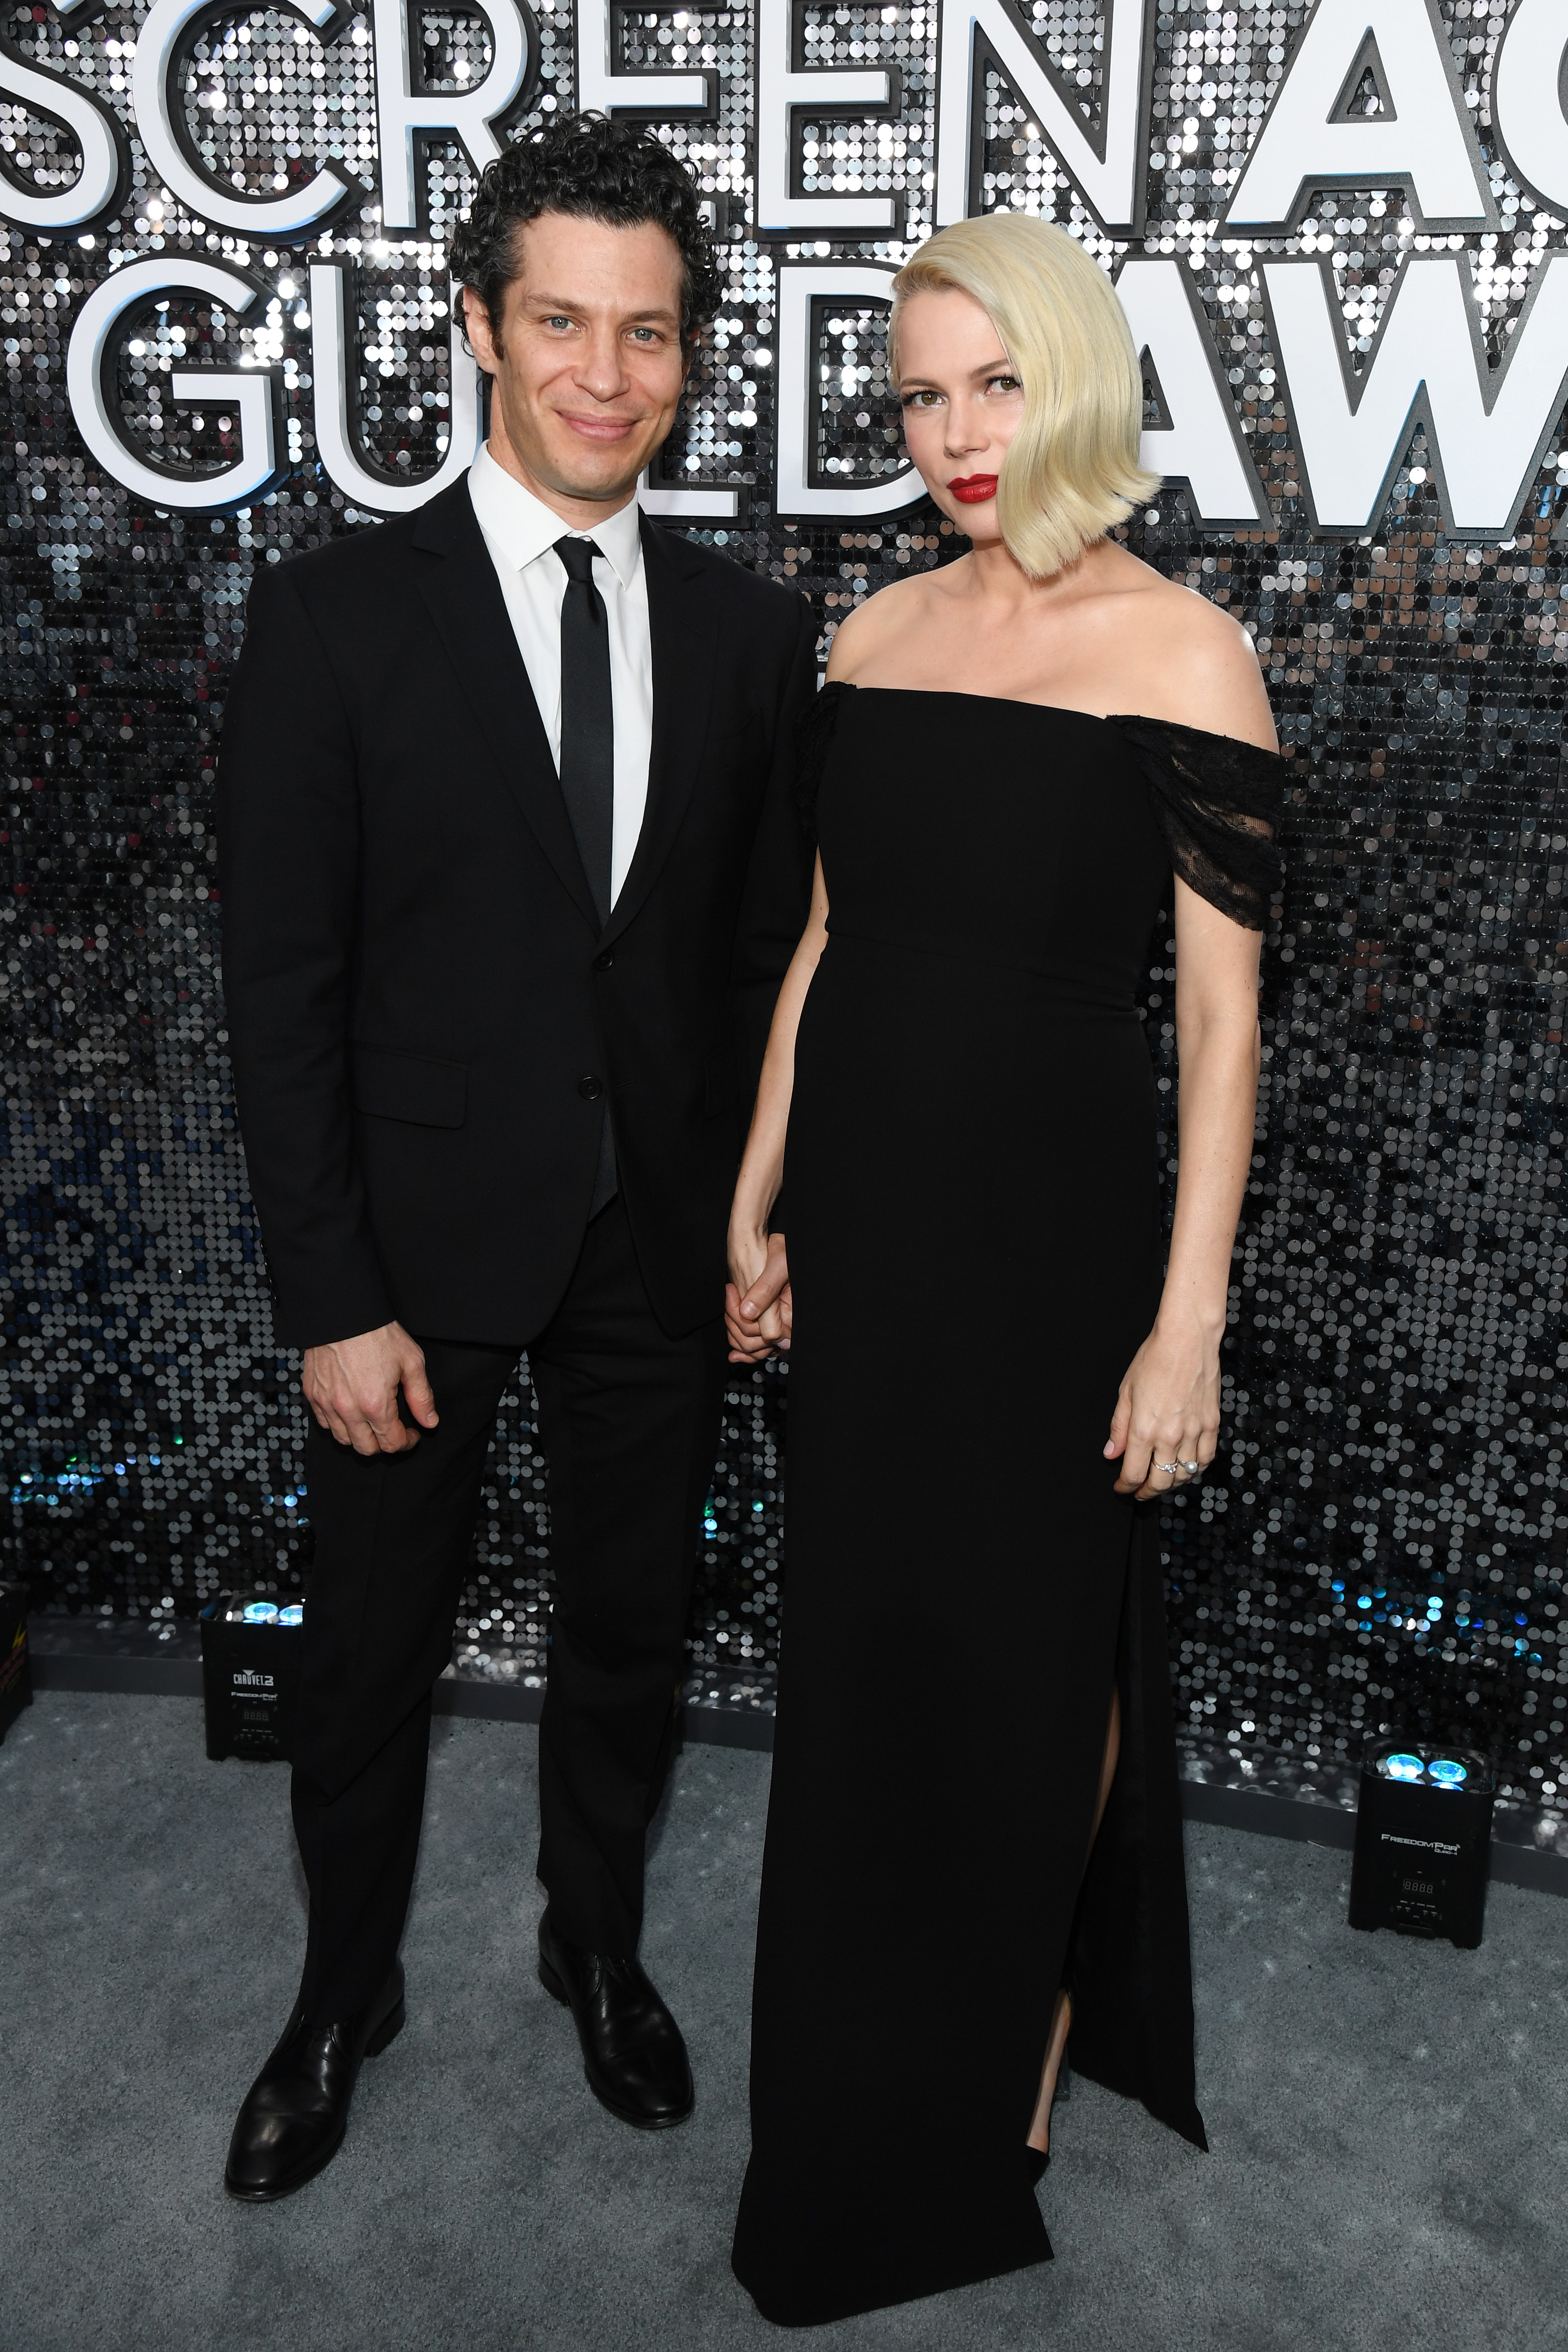 Thomas Kail and Michelle Williams, pictured at the 26th Annual Screen Actors Guild Awards in 2020, have two children together